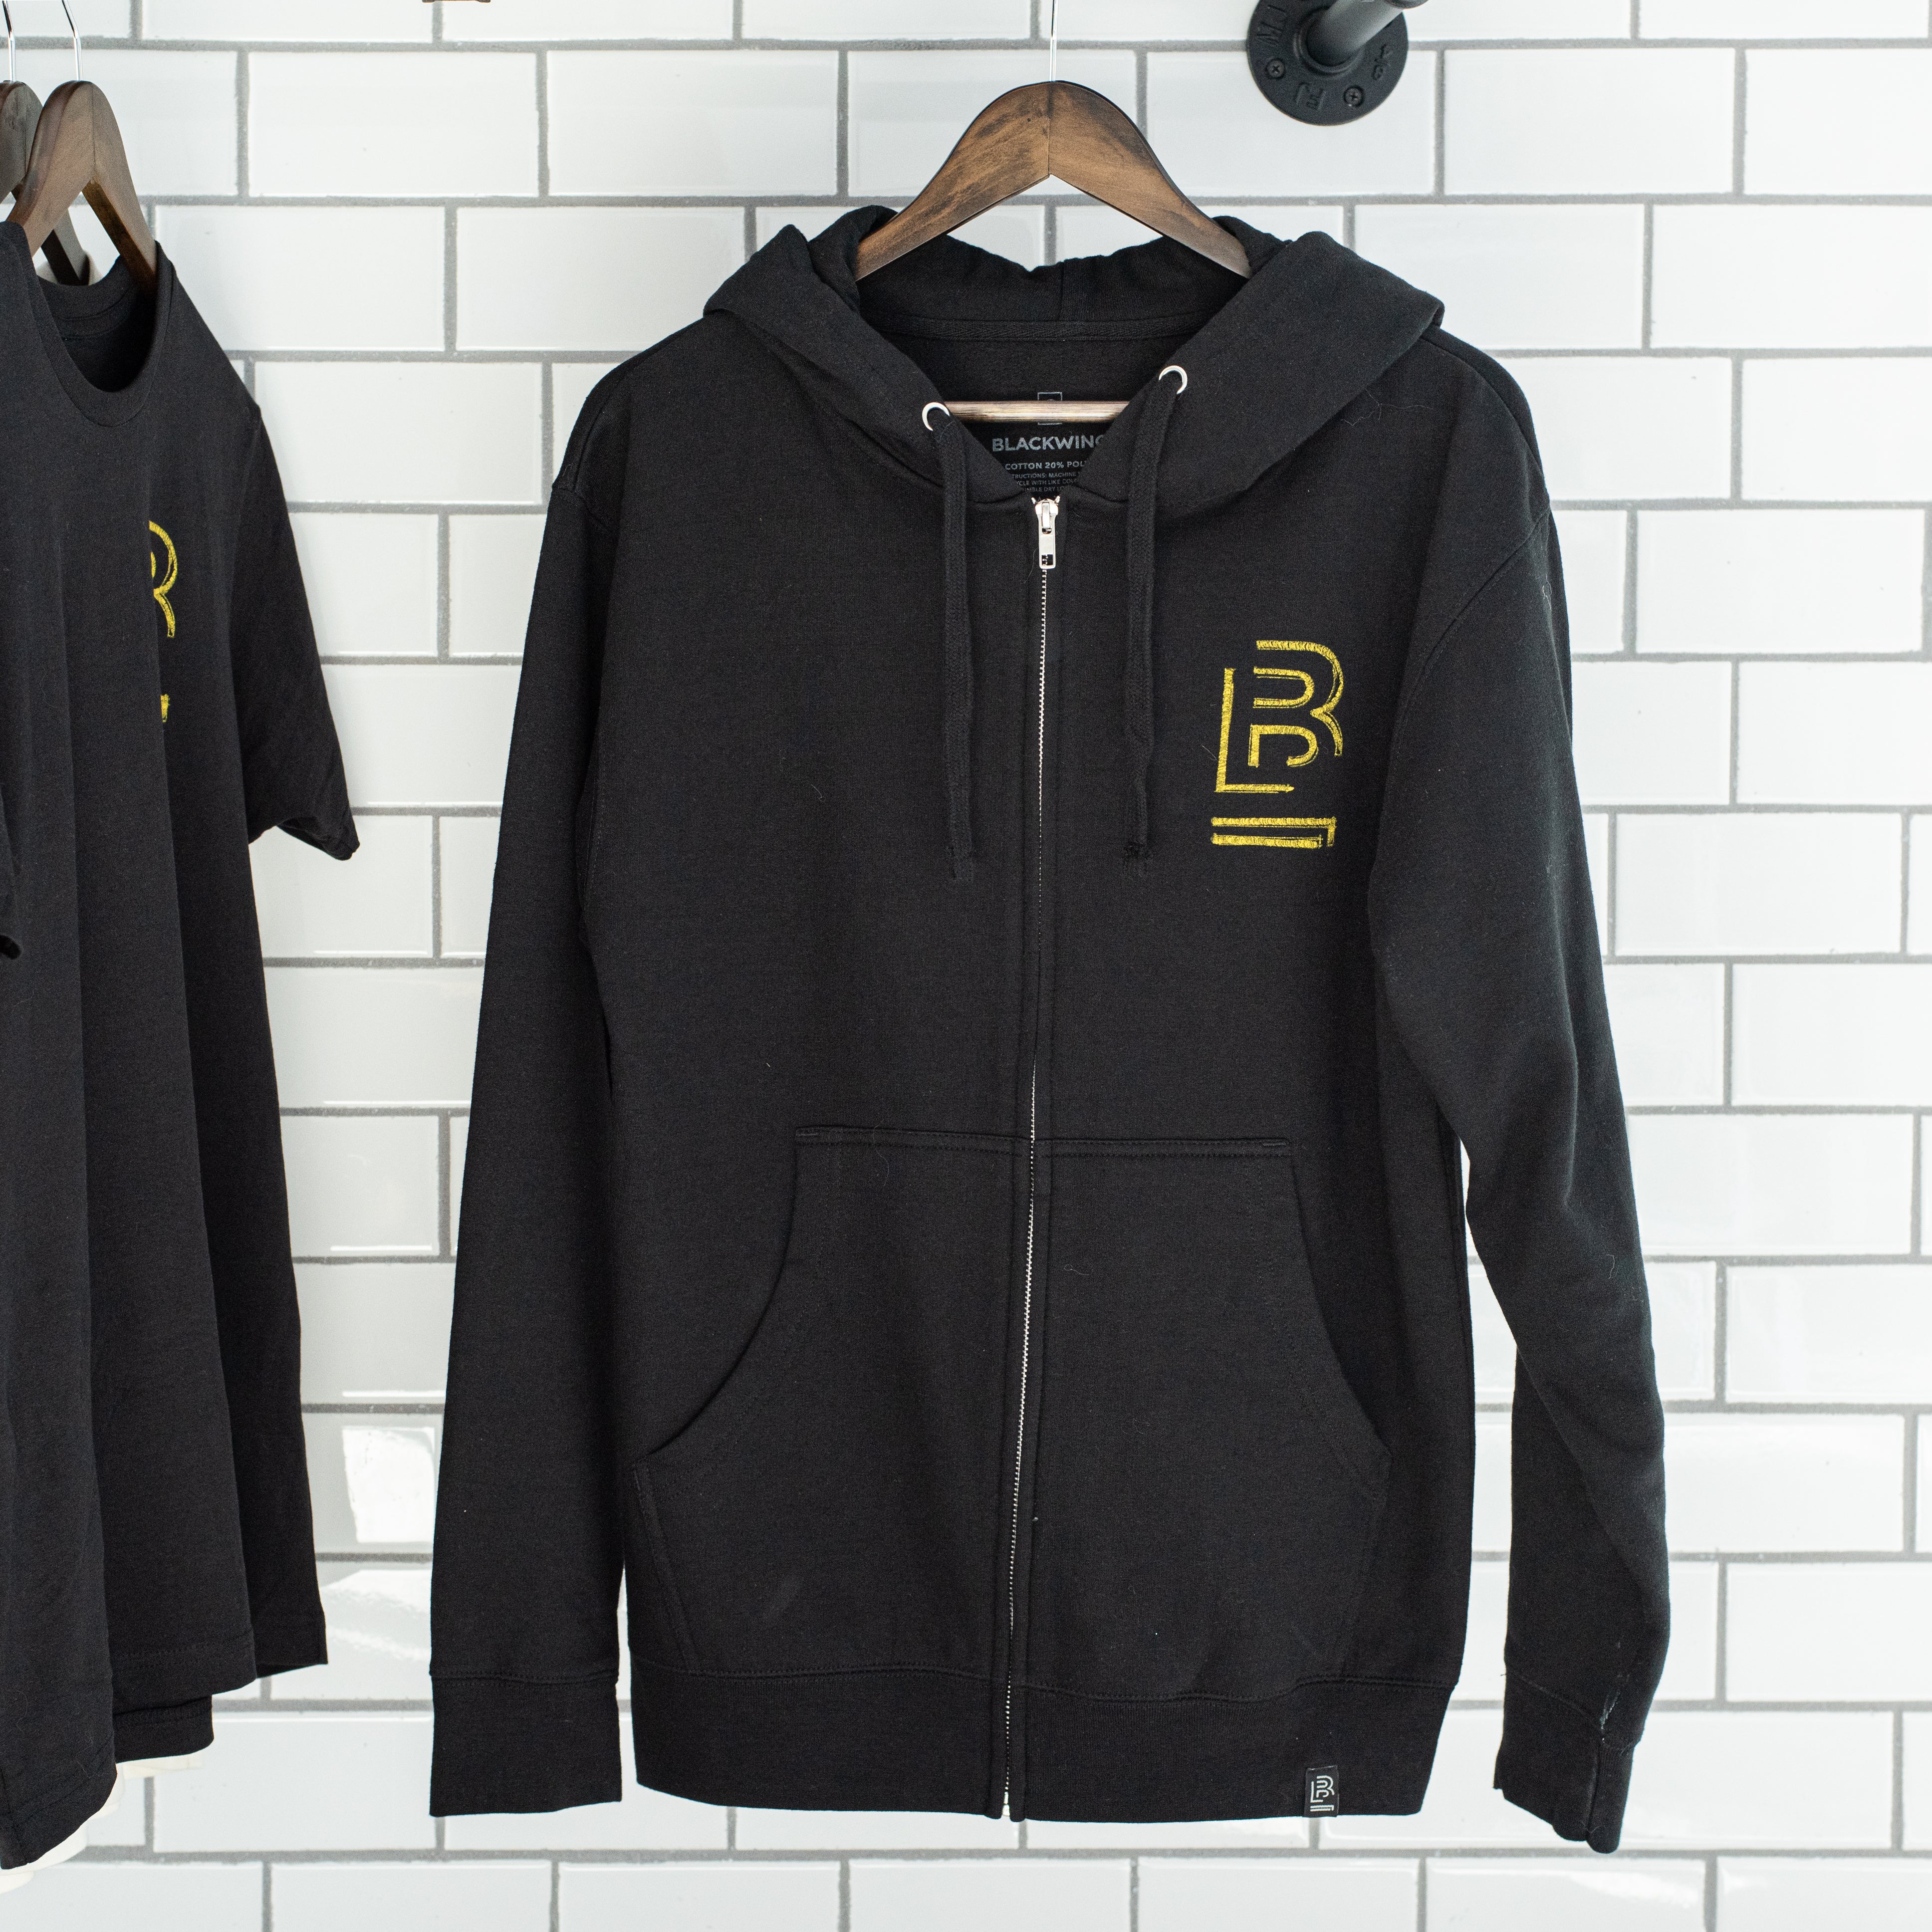 Two Blackwing Sketch Zip-up Hooded Sweatshirts from the Winter 2019 collection, hanging on a brick wall.